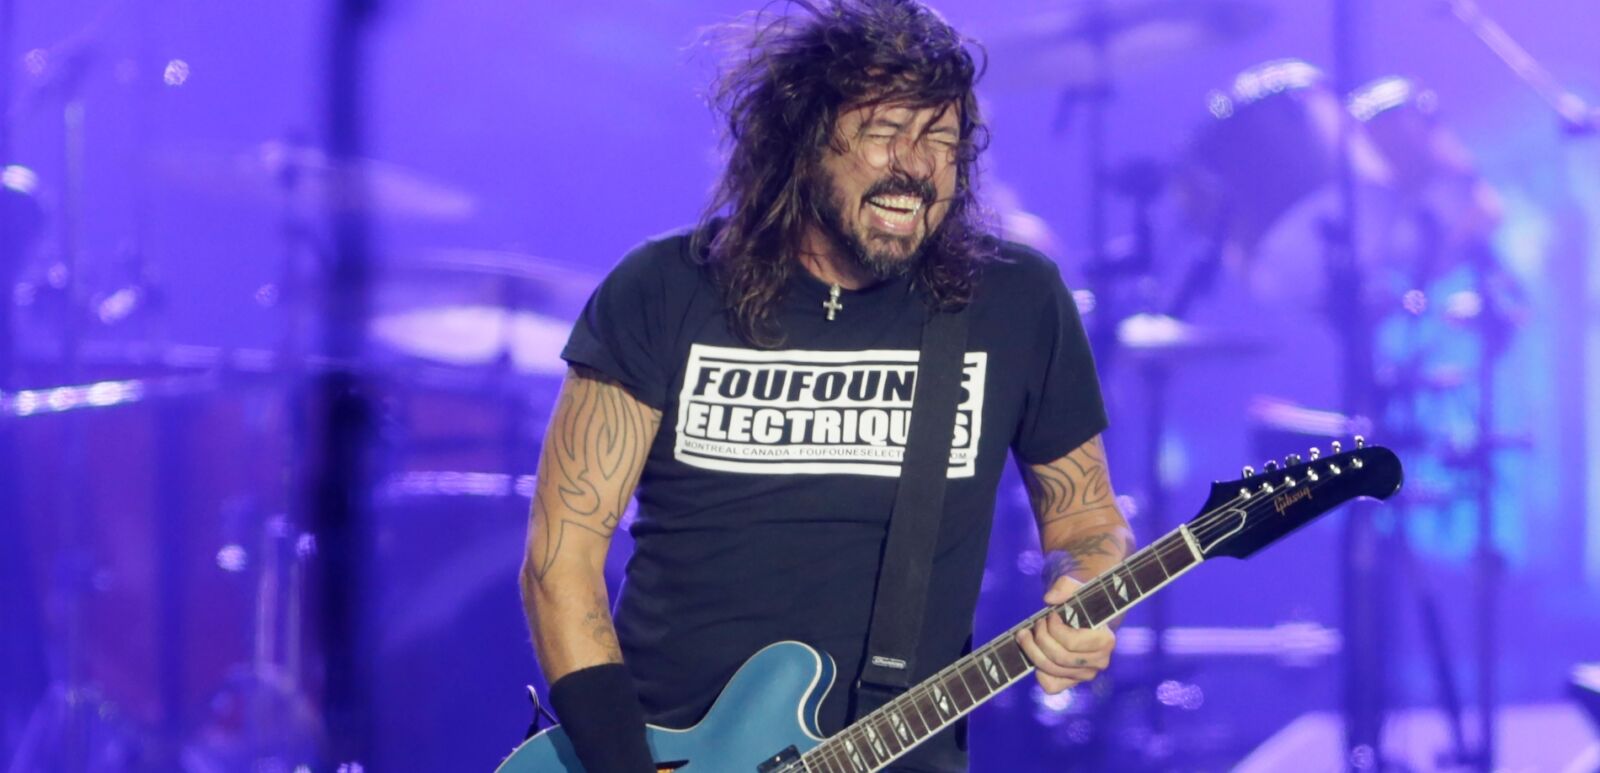 Dave Grohl rocking out with Foo Fighters. Photo via Shutterstock.